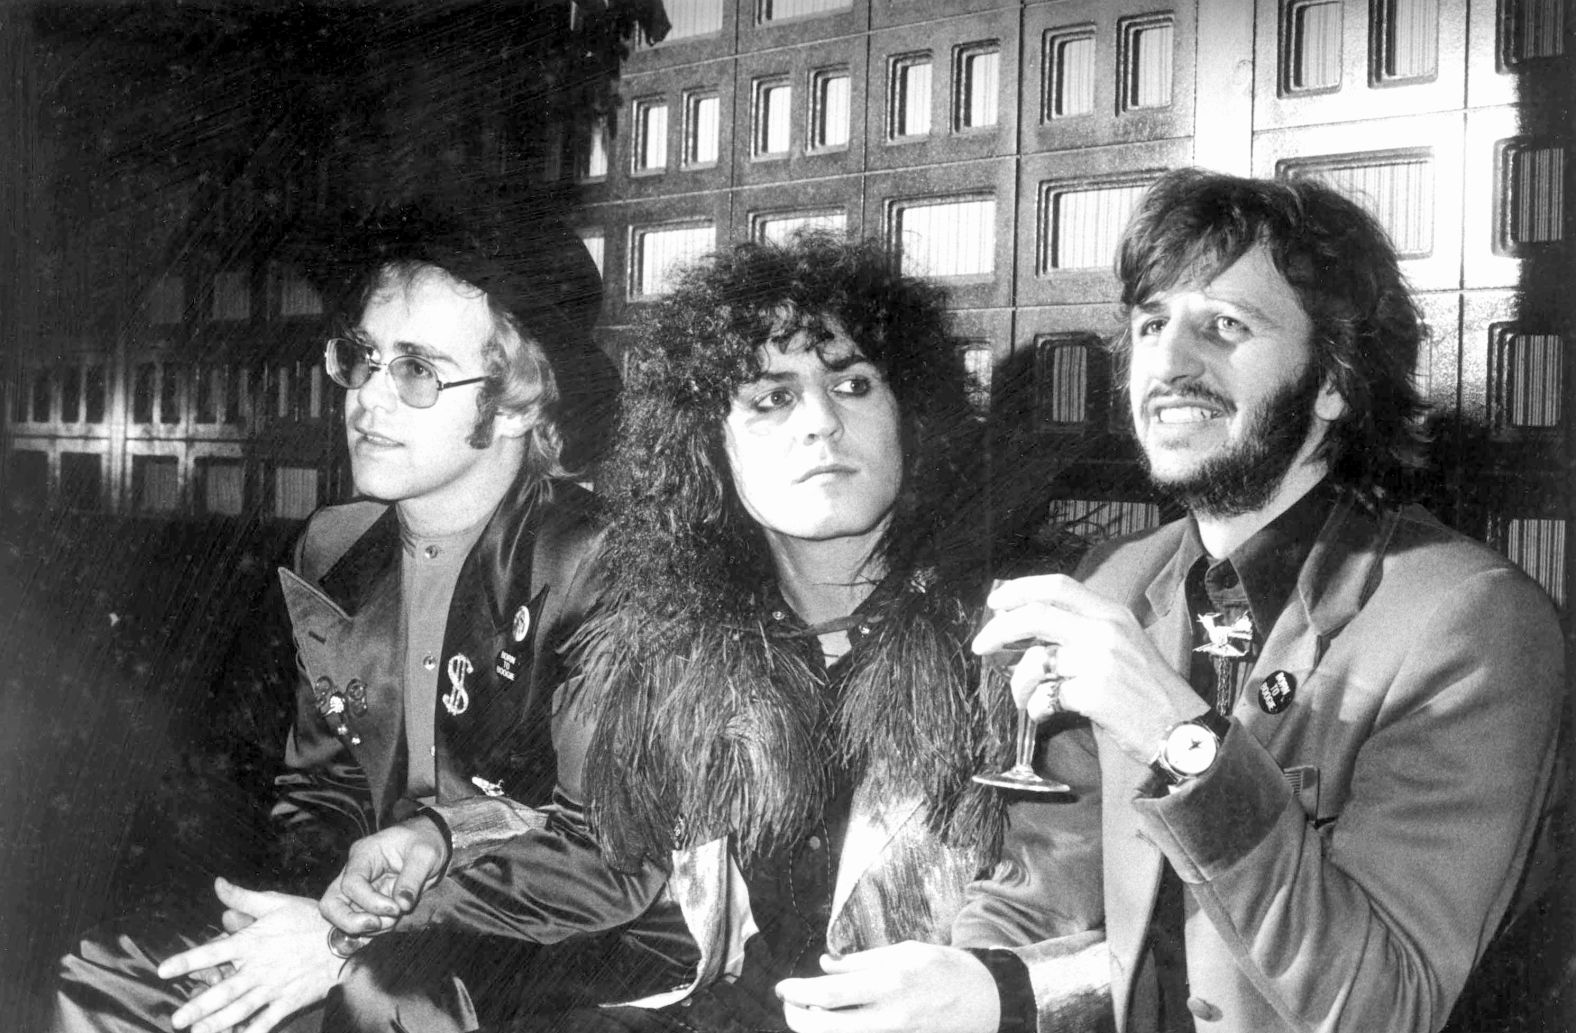 From left, Elton John, Marc Bolan and Starr have a drink together while promoting the film "Born to Boogie" in 1972.